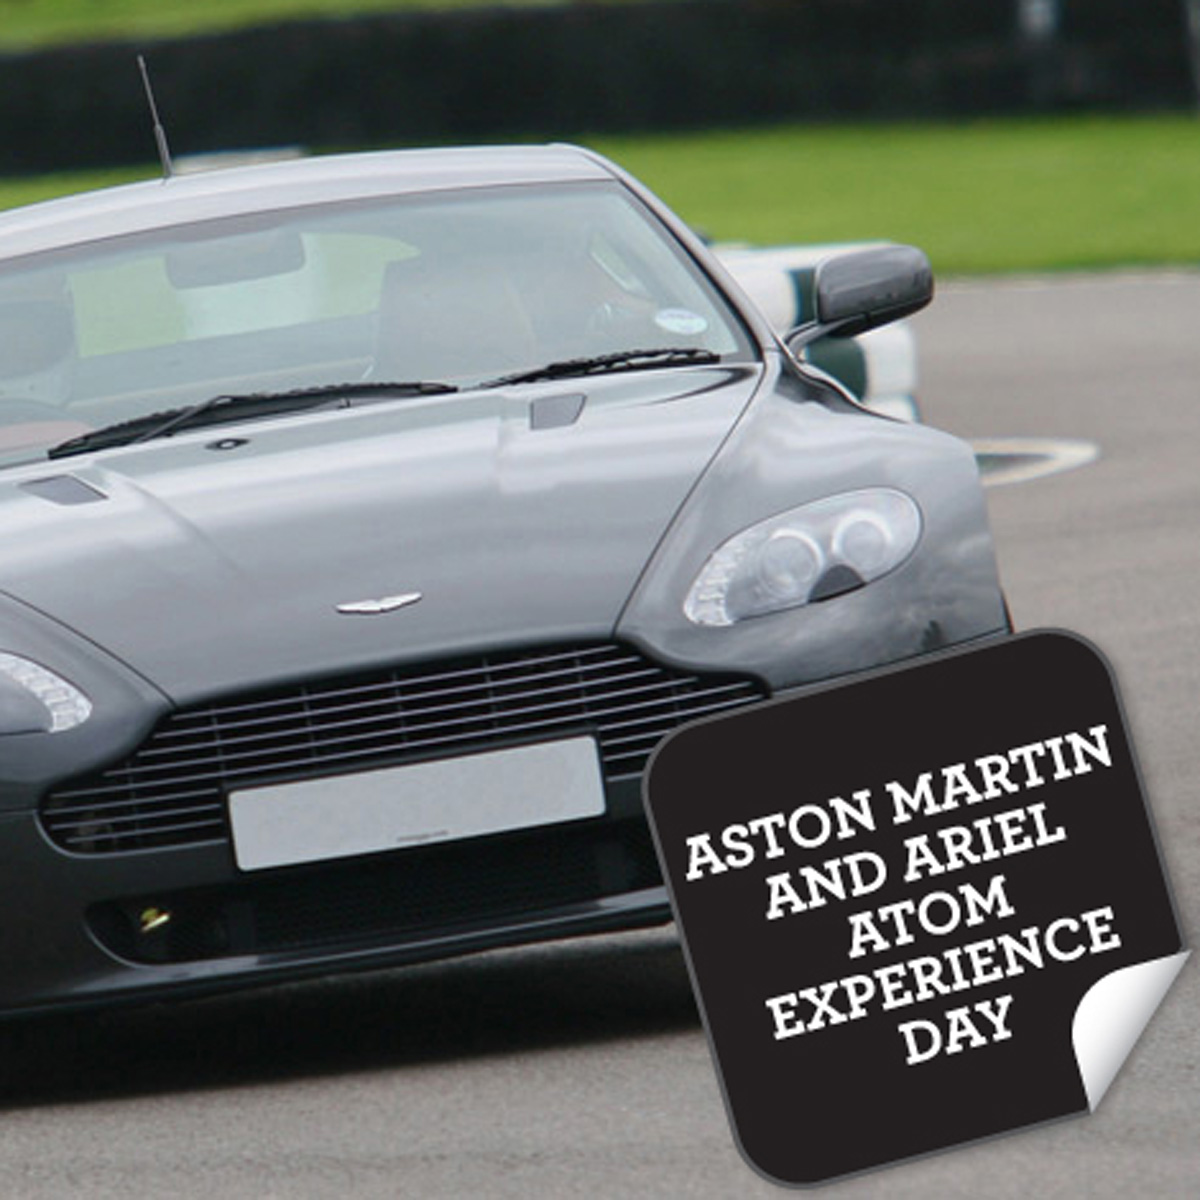 Aston Martin and Ariel Atom Experience Day